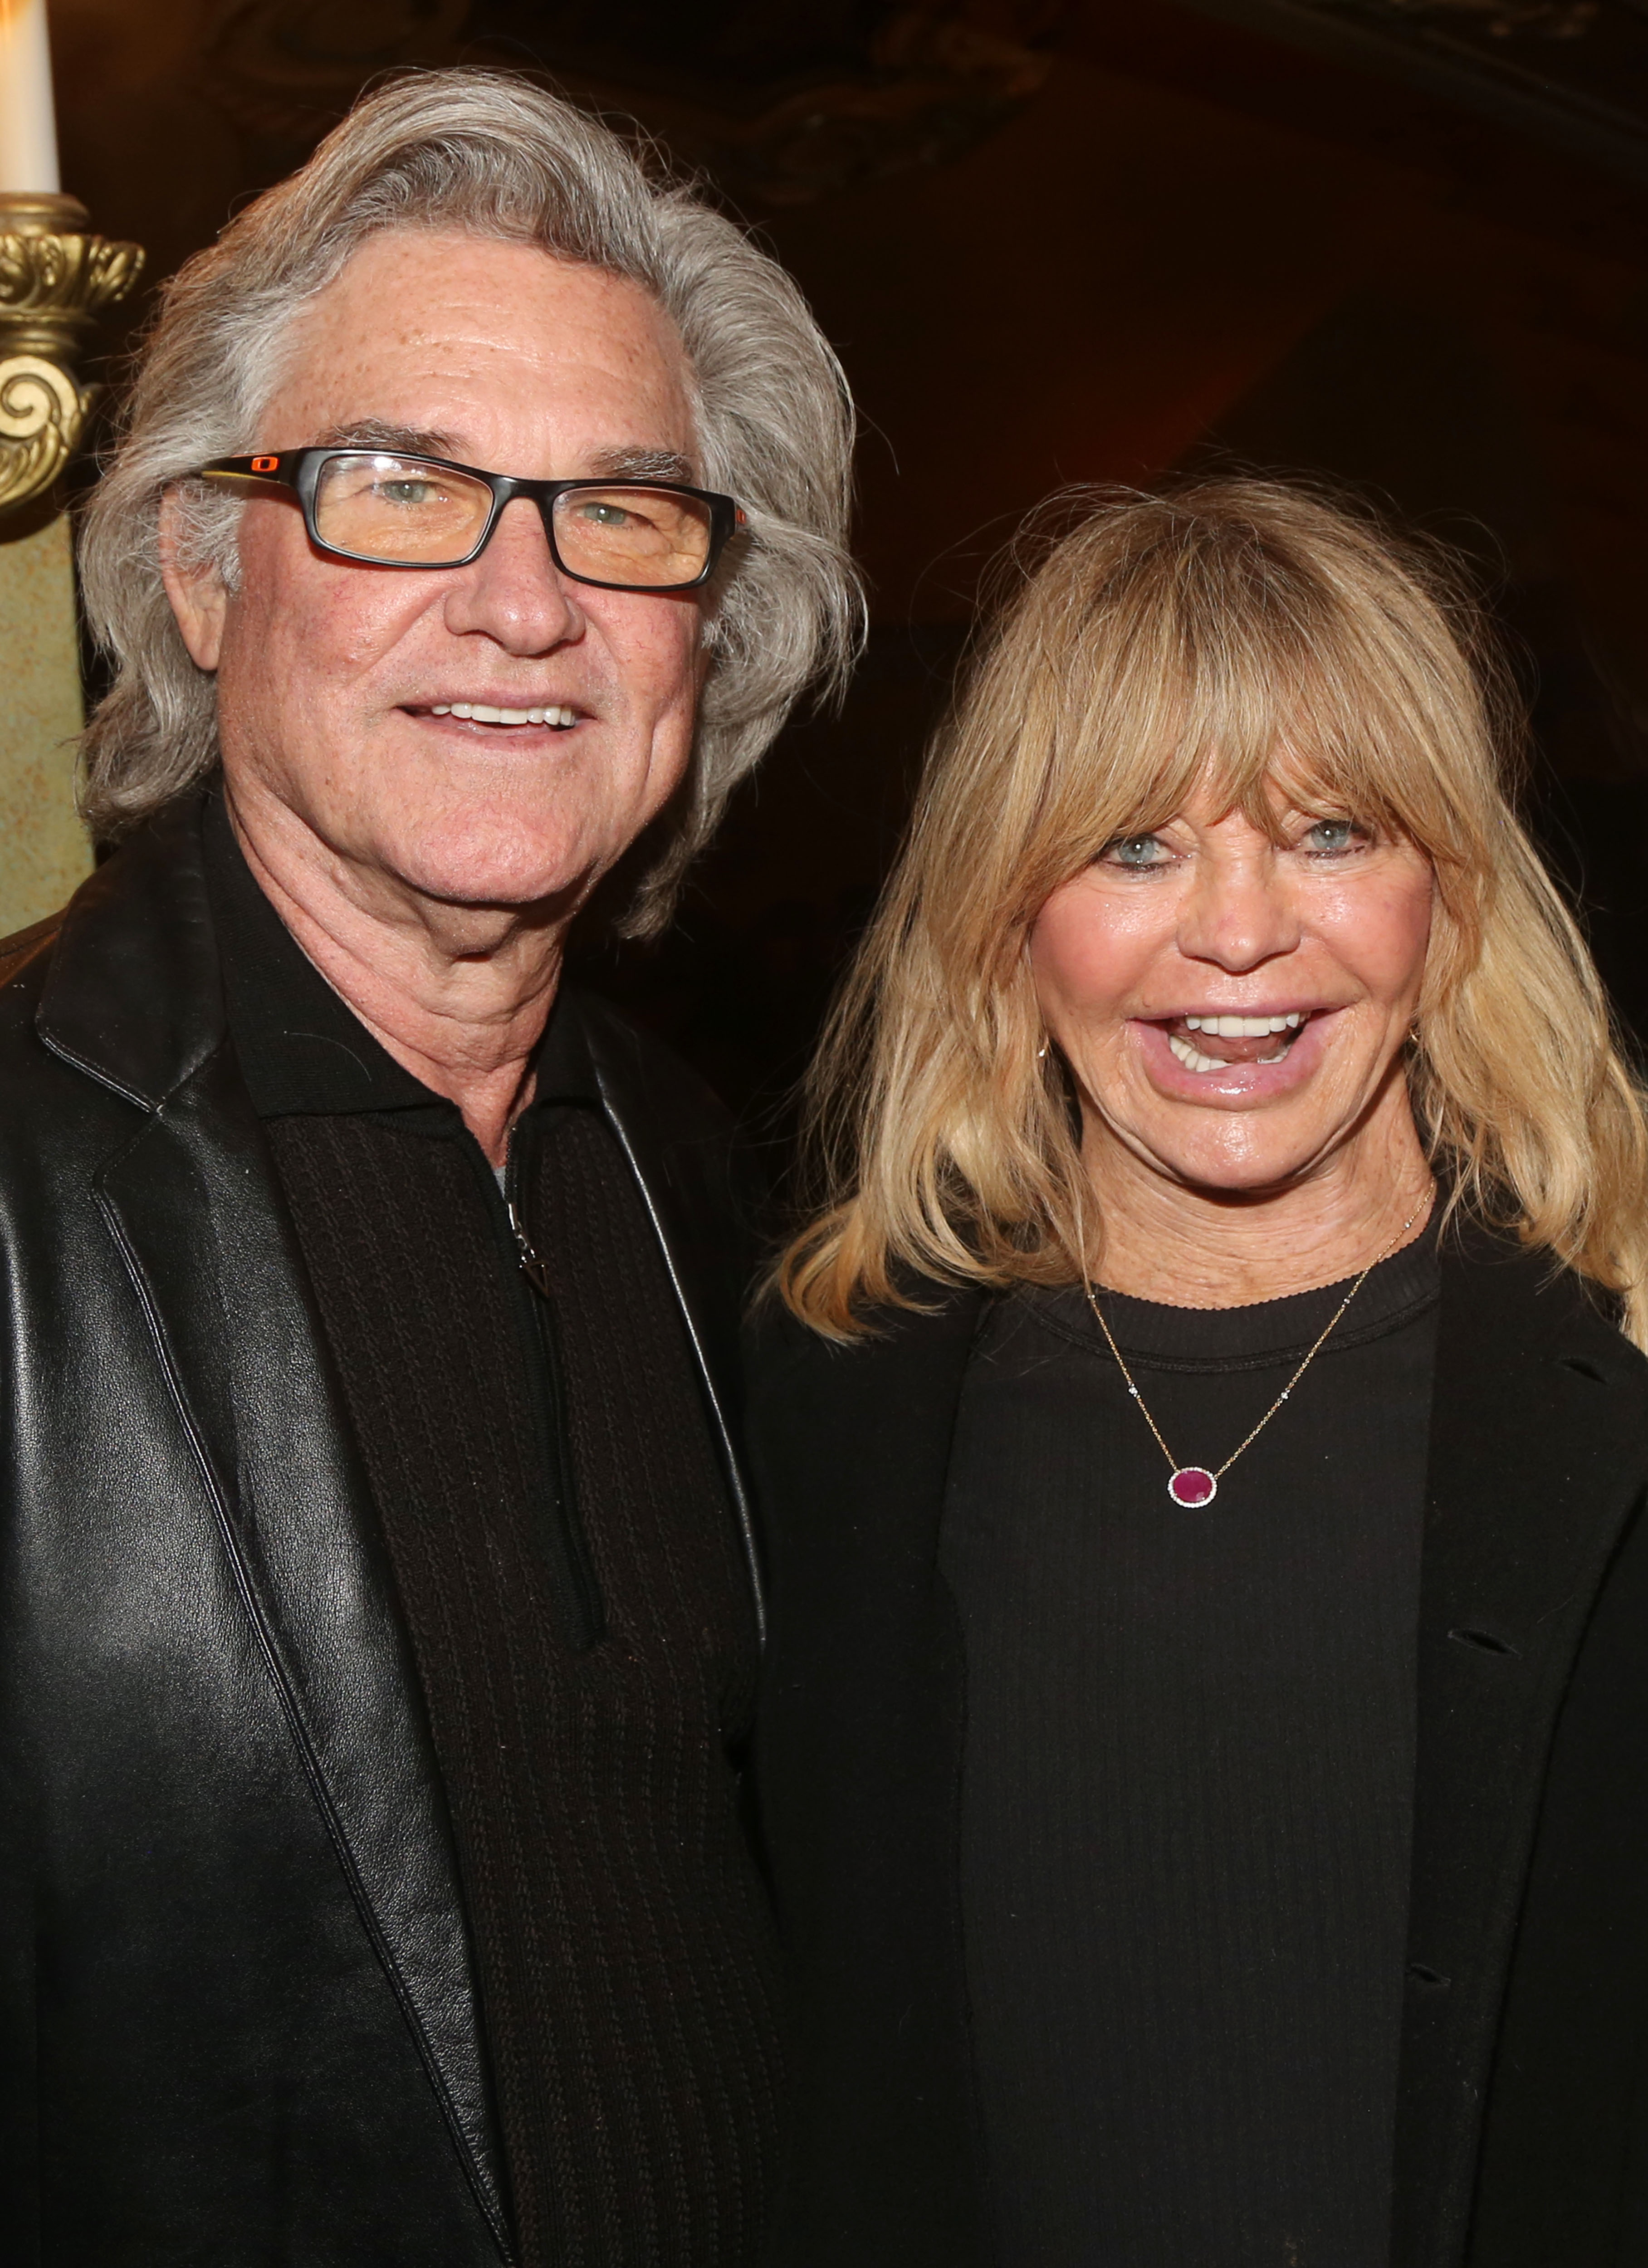 Kurt Russell and Goldie Hawn on February 15, 2023 in New York City. | Source: Getty Images